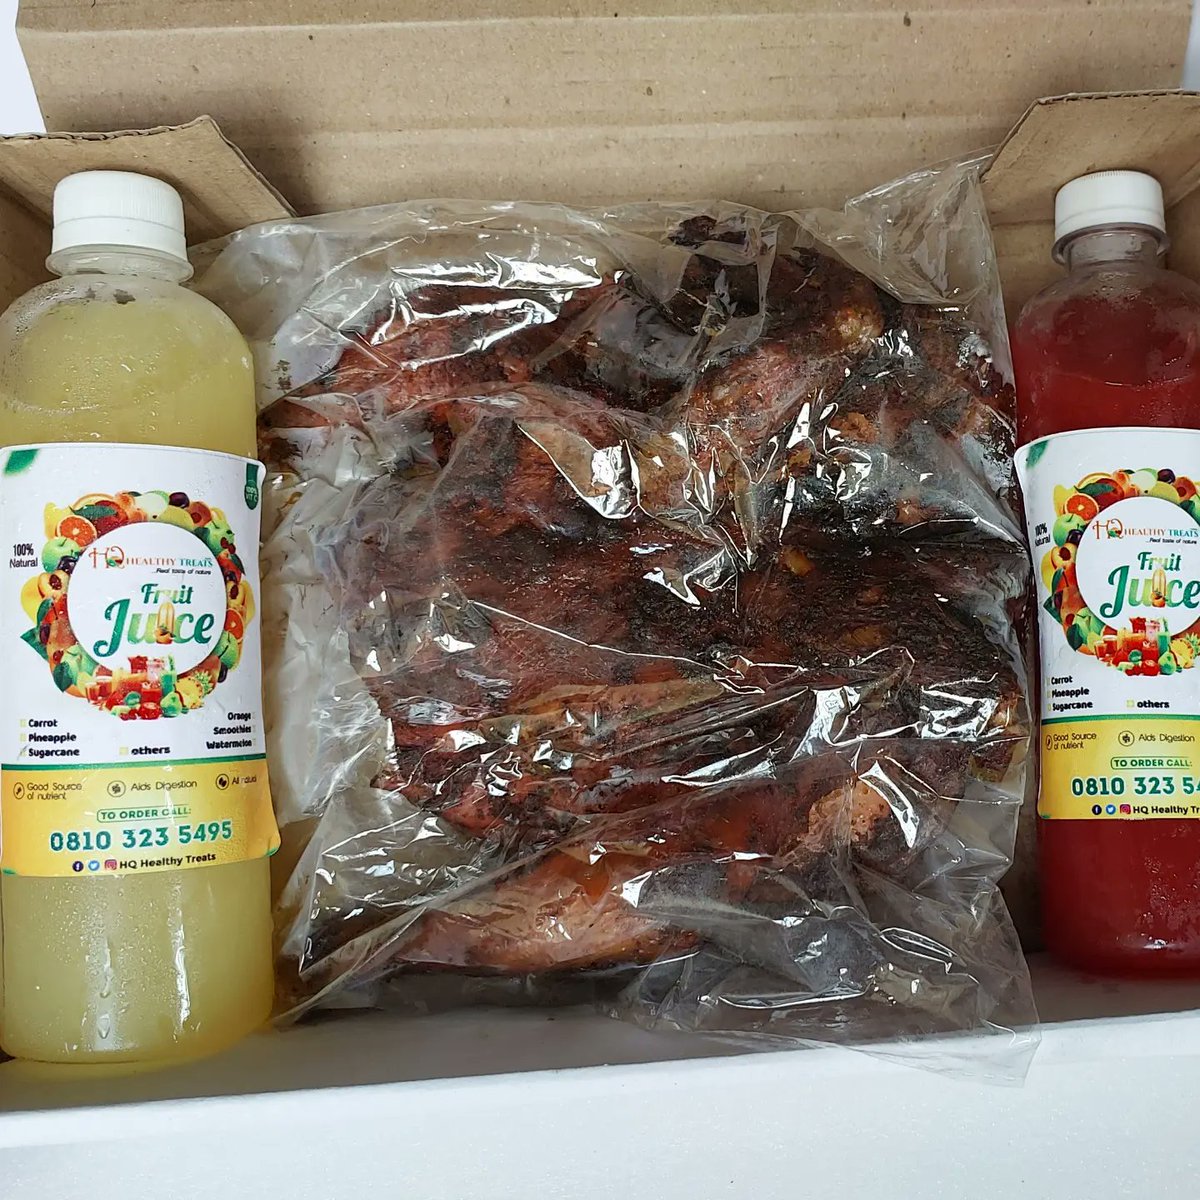 The hustle is real for business owners. What I do at @HqTreats is to find the cheapest yet effective delivery plug, or we do paired delivery.  And there is always a pick-up option, too 😊

#juicesinlagos
#guineafowlinlagos
#giftboxesinlagos
#foodgifts